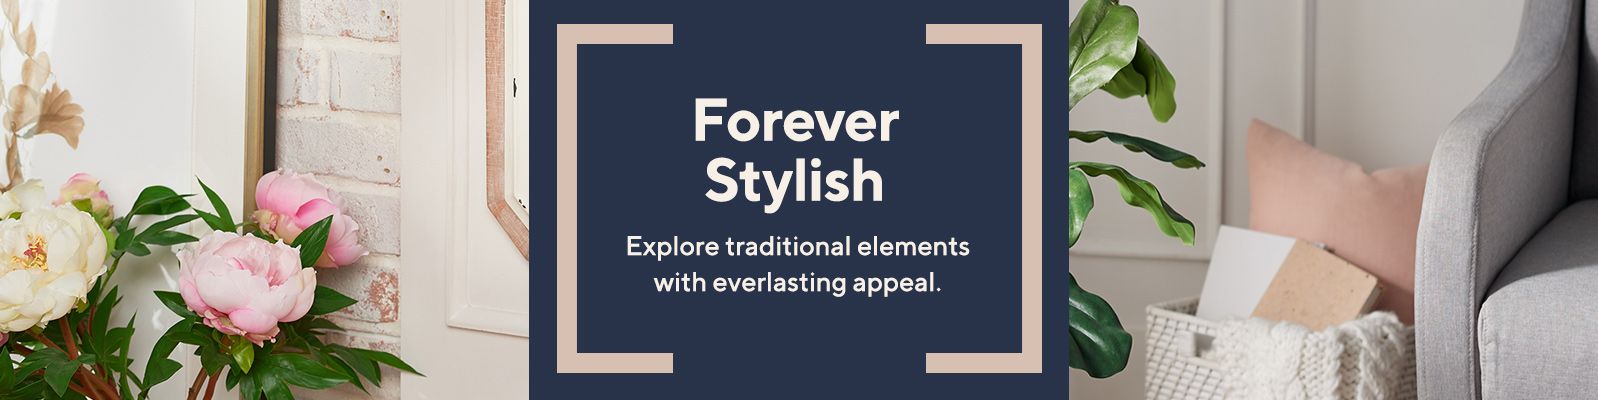 Forever Stylish.  Explore traditional elements with everlasting appeal.